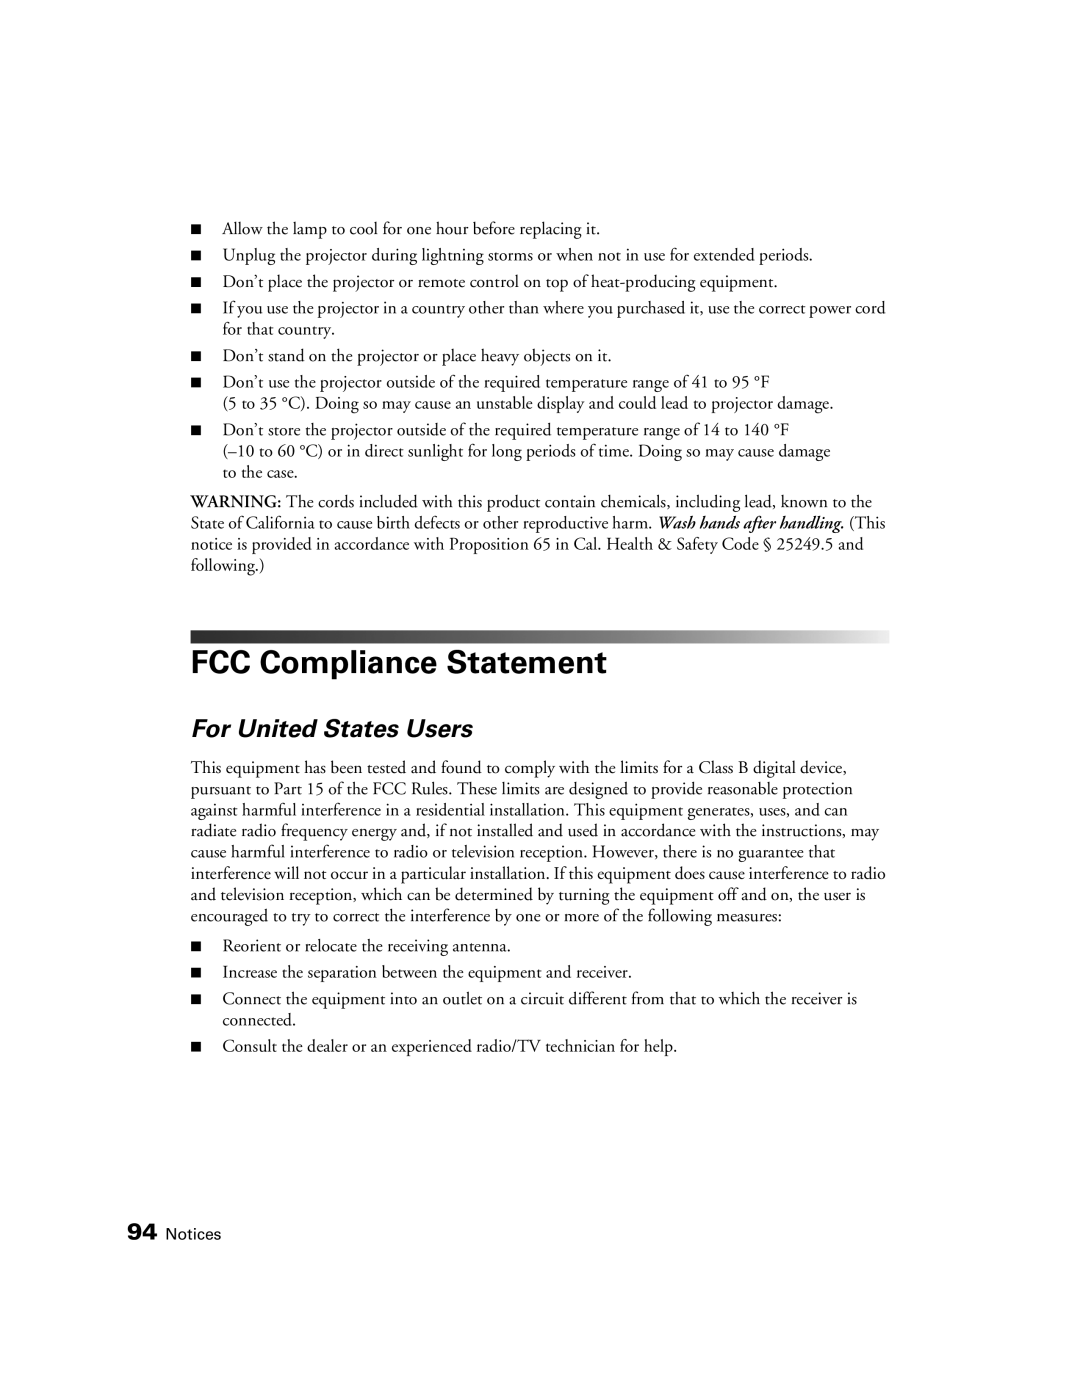 Epson PowerLite Home Cinema 3020, HC3020, 3020E manual FCC Compliance Statement, For United States Users 